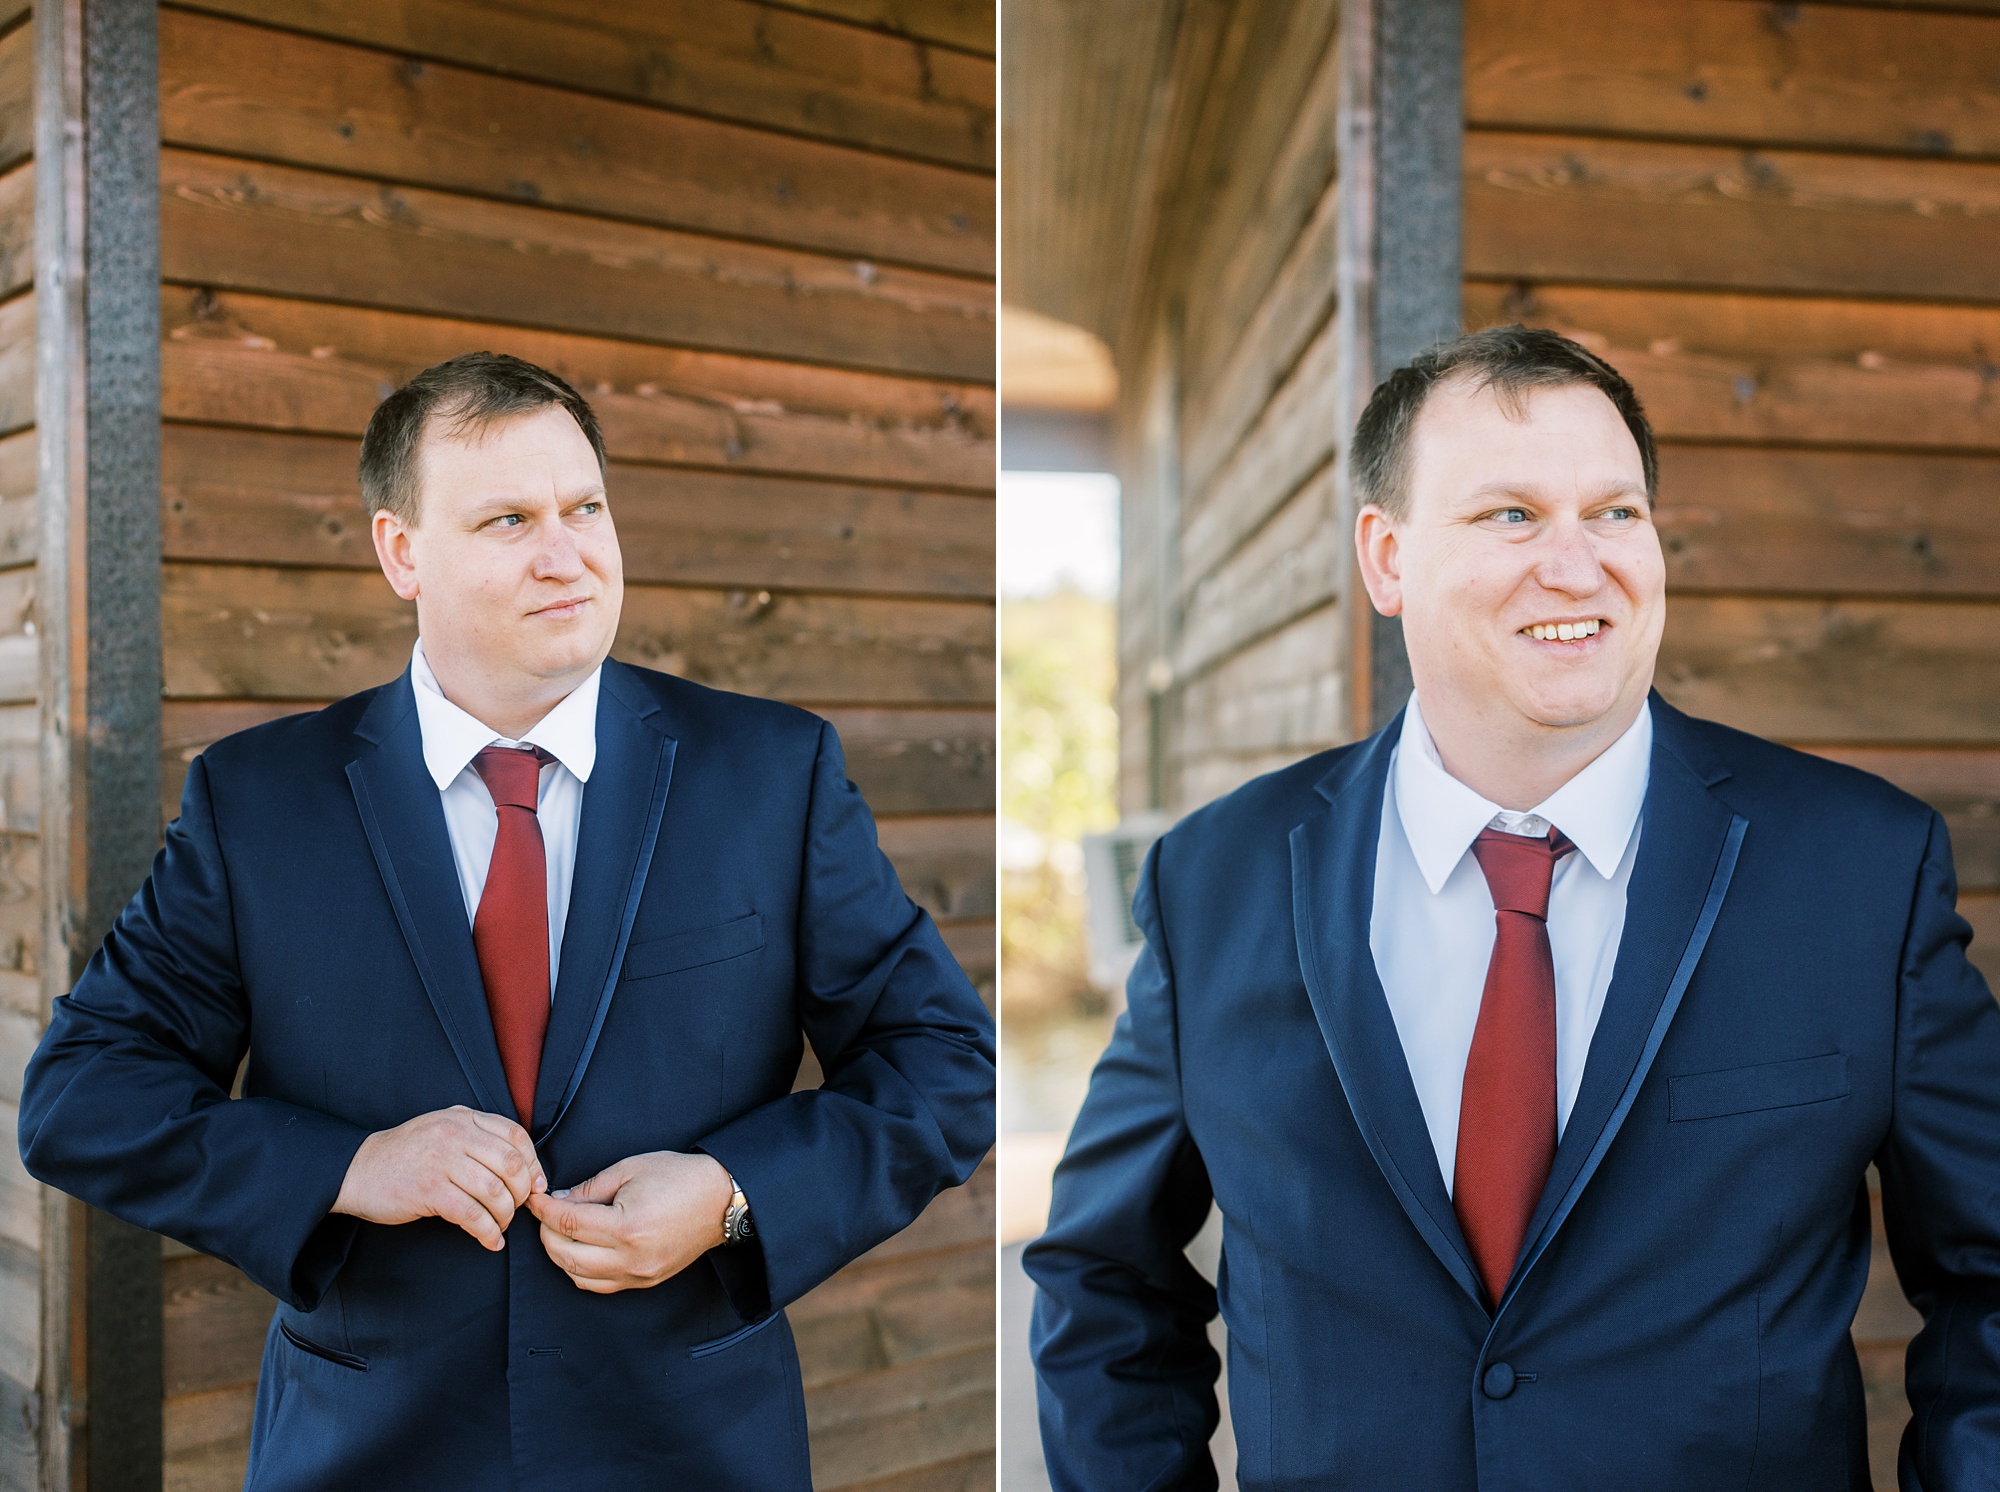 groom in navy suit with red tie poses before NC wedding